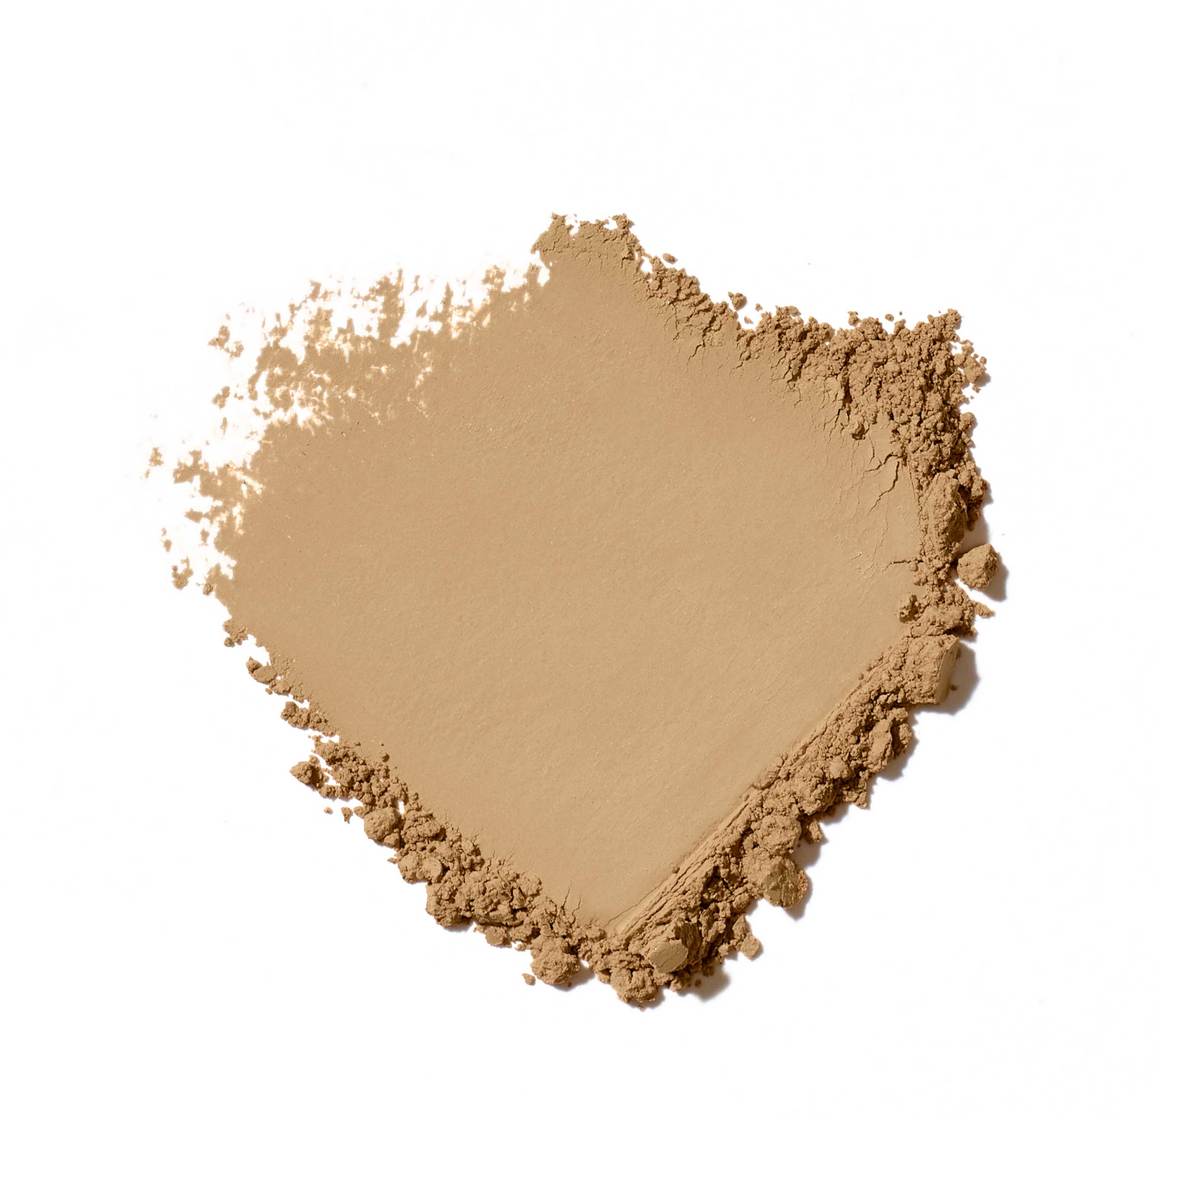 Jane Iredale Amazing Base Loose Mineral Powder Foundation Refillable Brush + 2 Refill Canisters